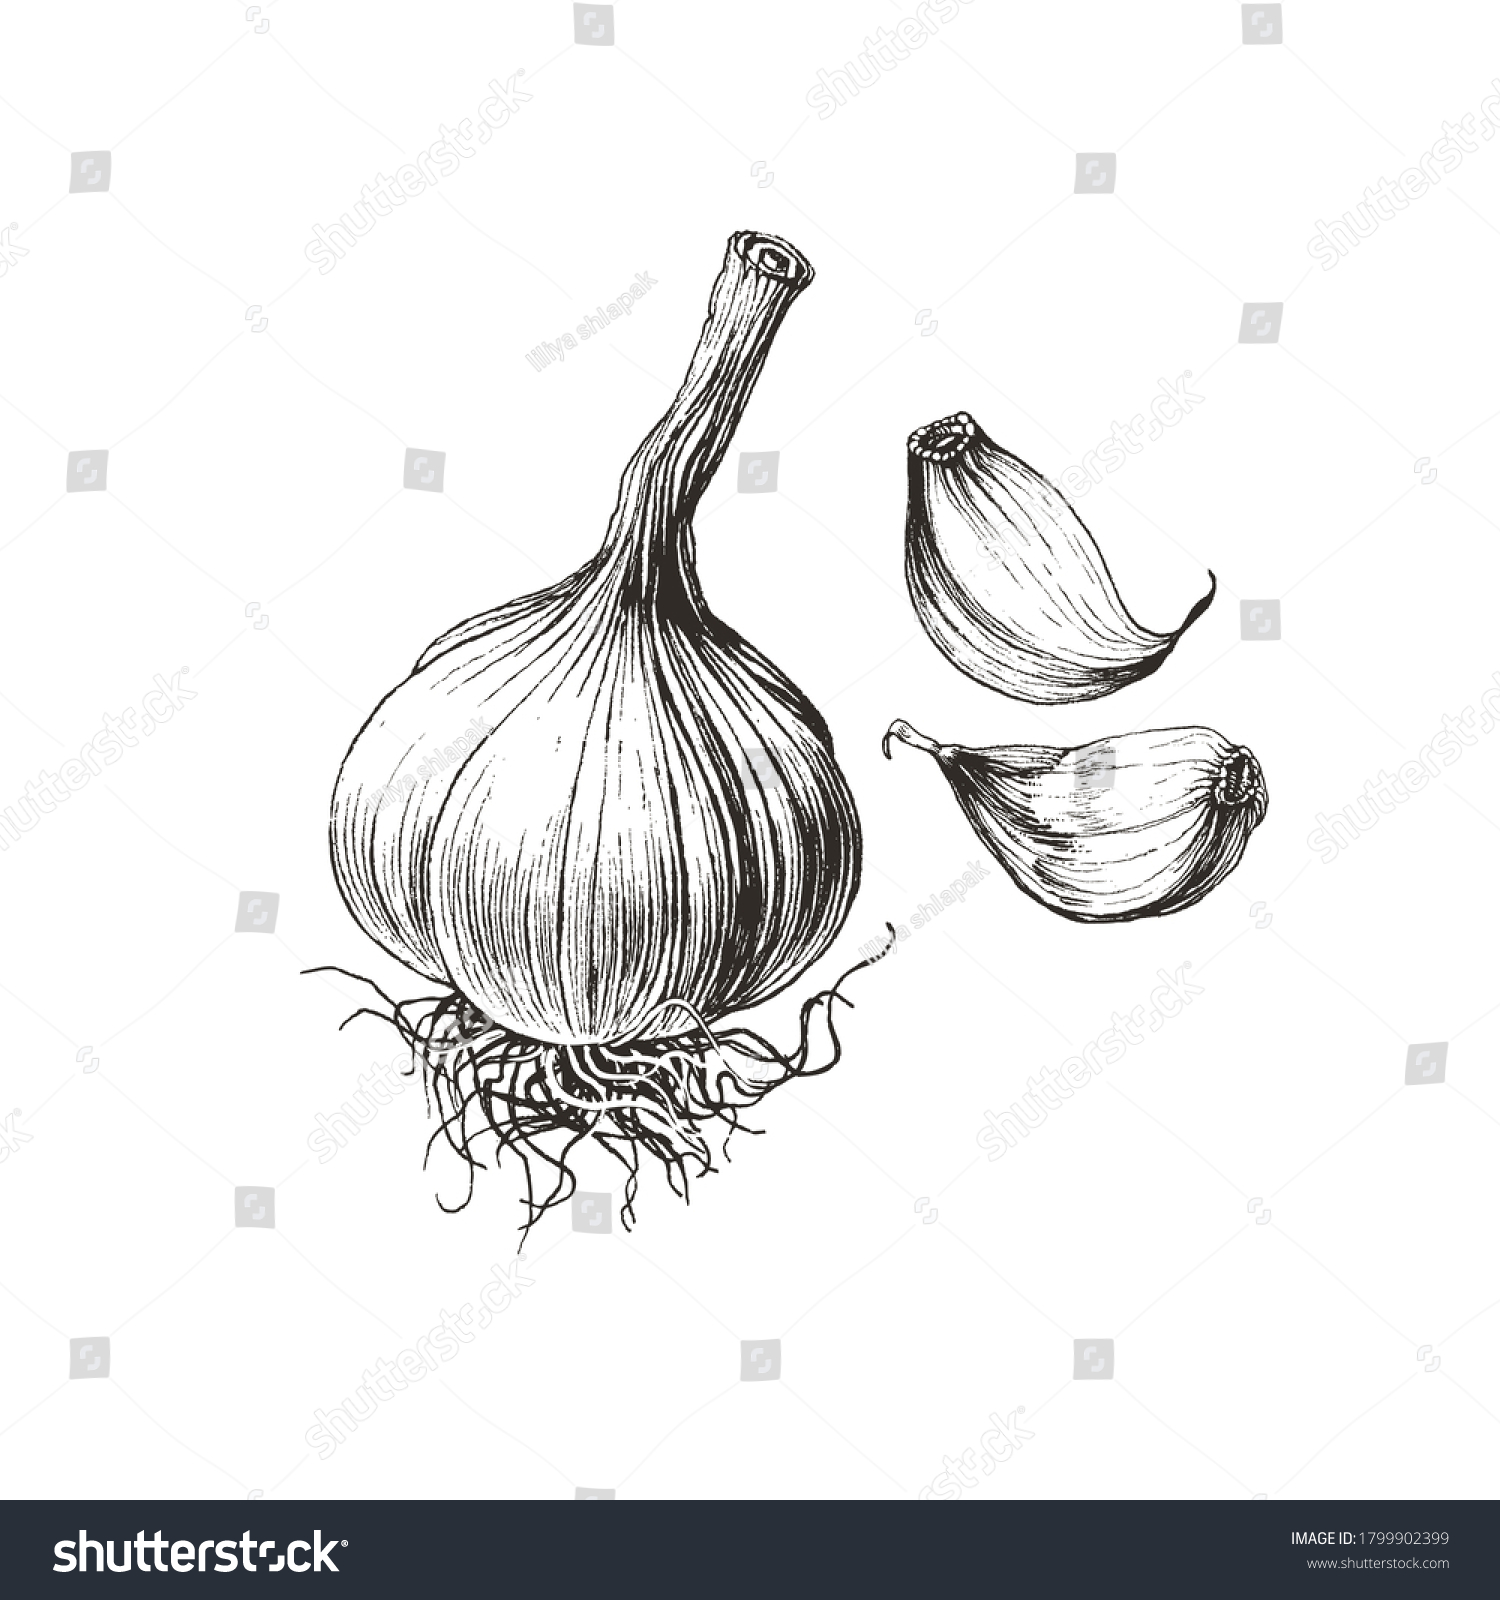 Detailed drawing of garlic bulb and cloves, vegetable clip art illustration #1799902399